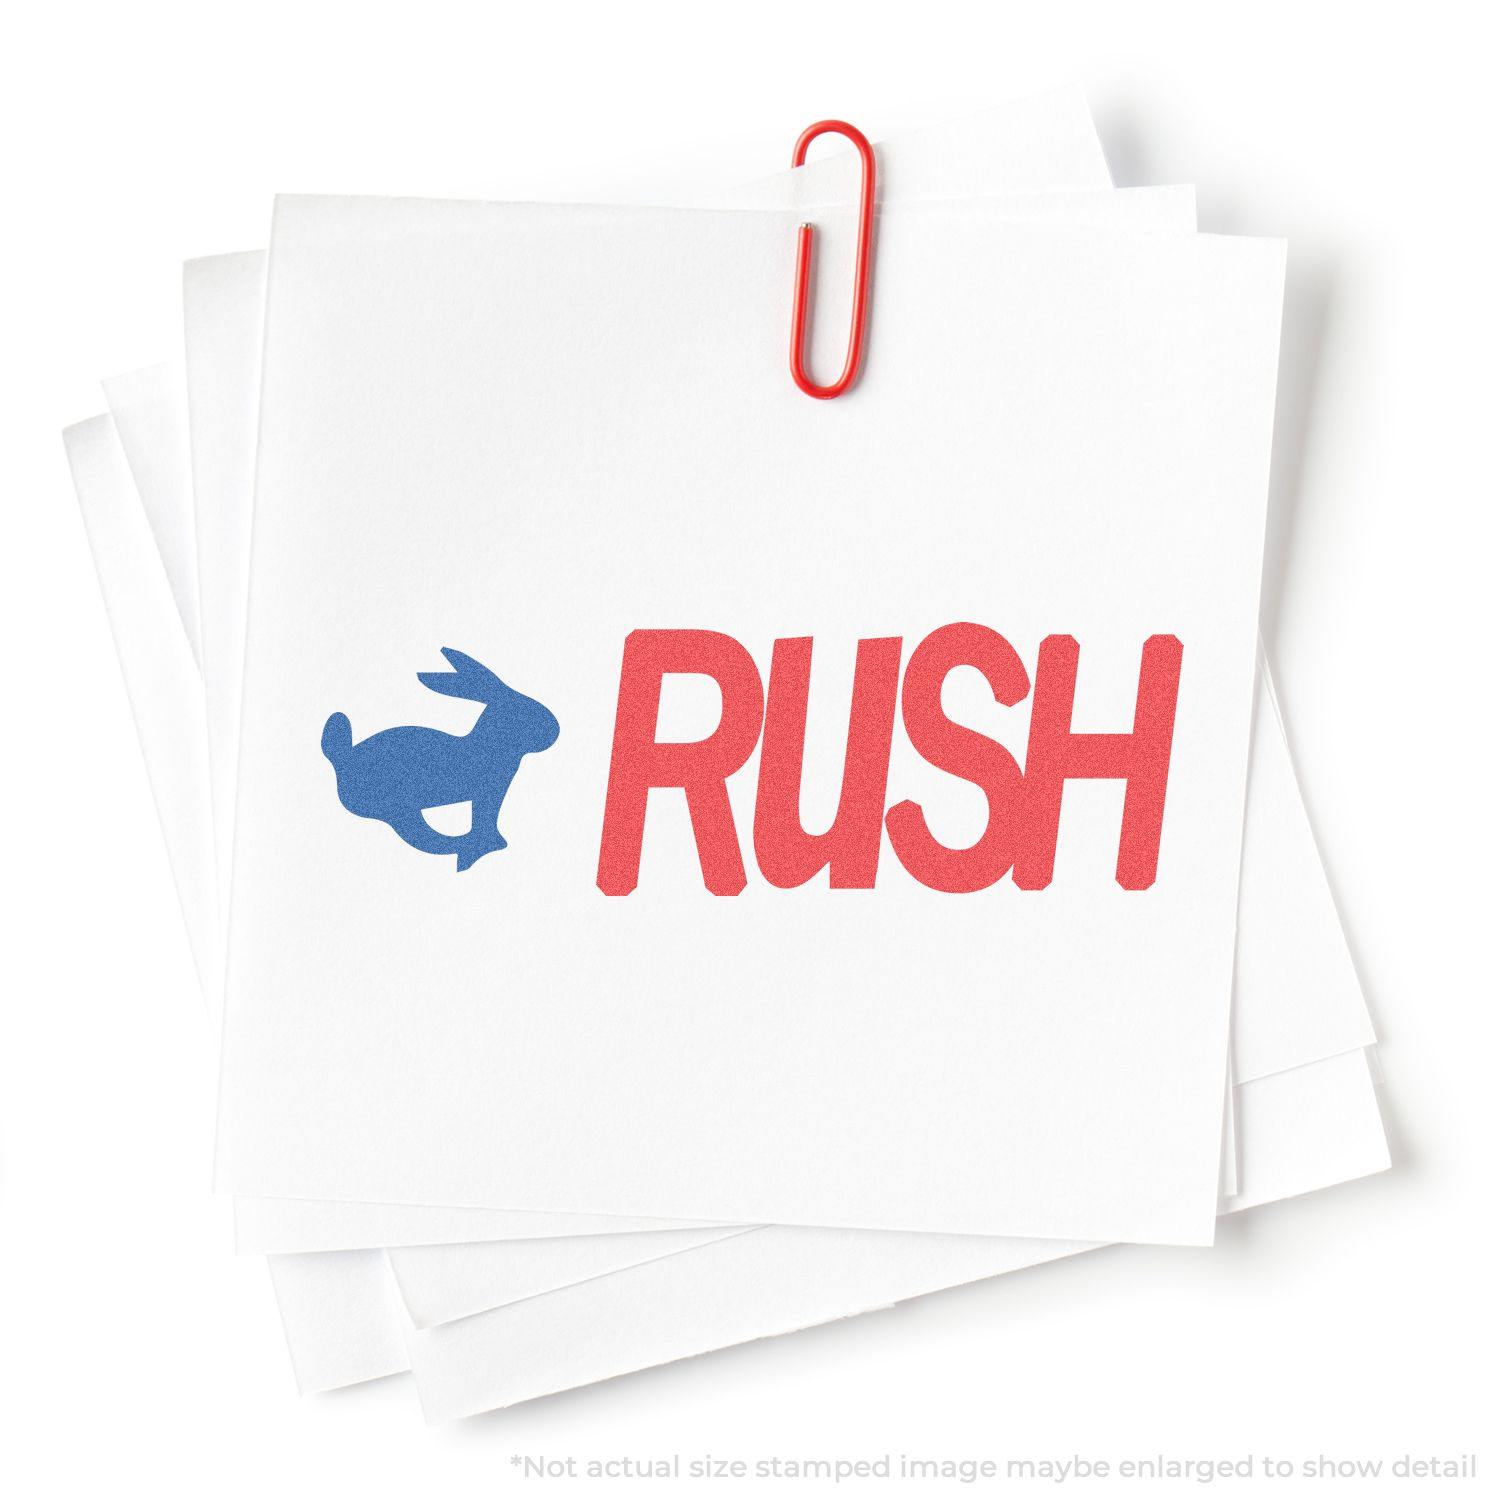 In Use Photo of Two-color Rush Xstamper Stamp